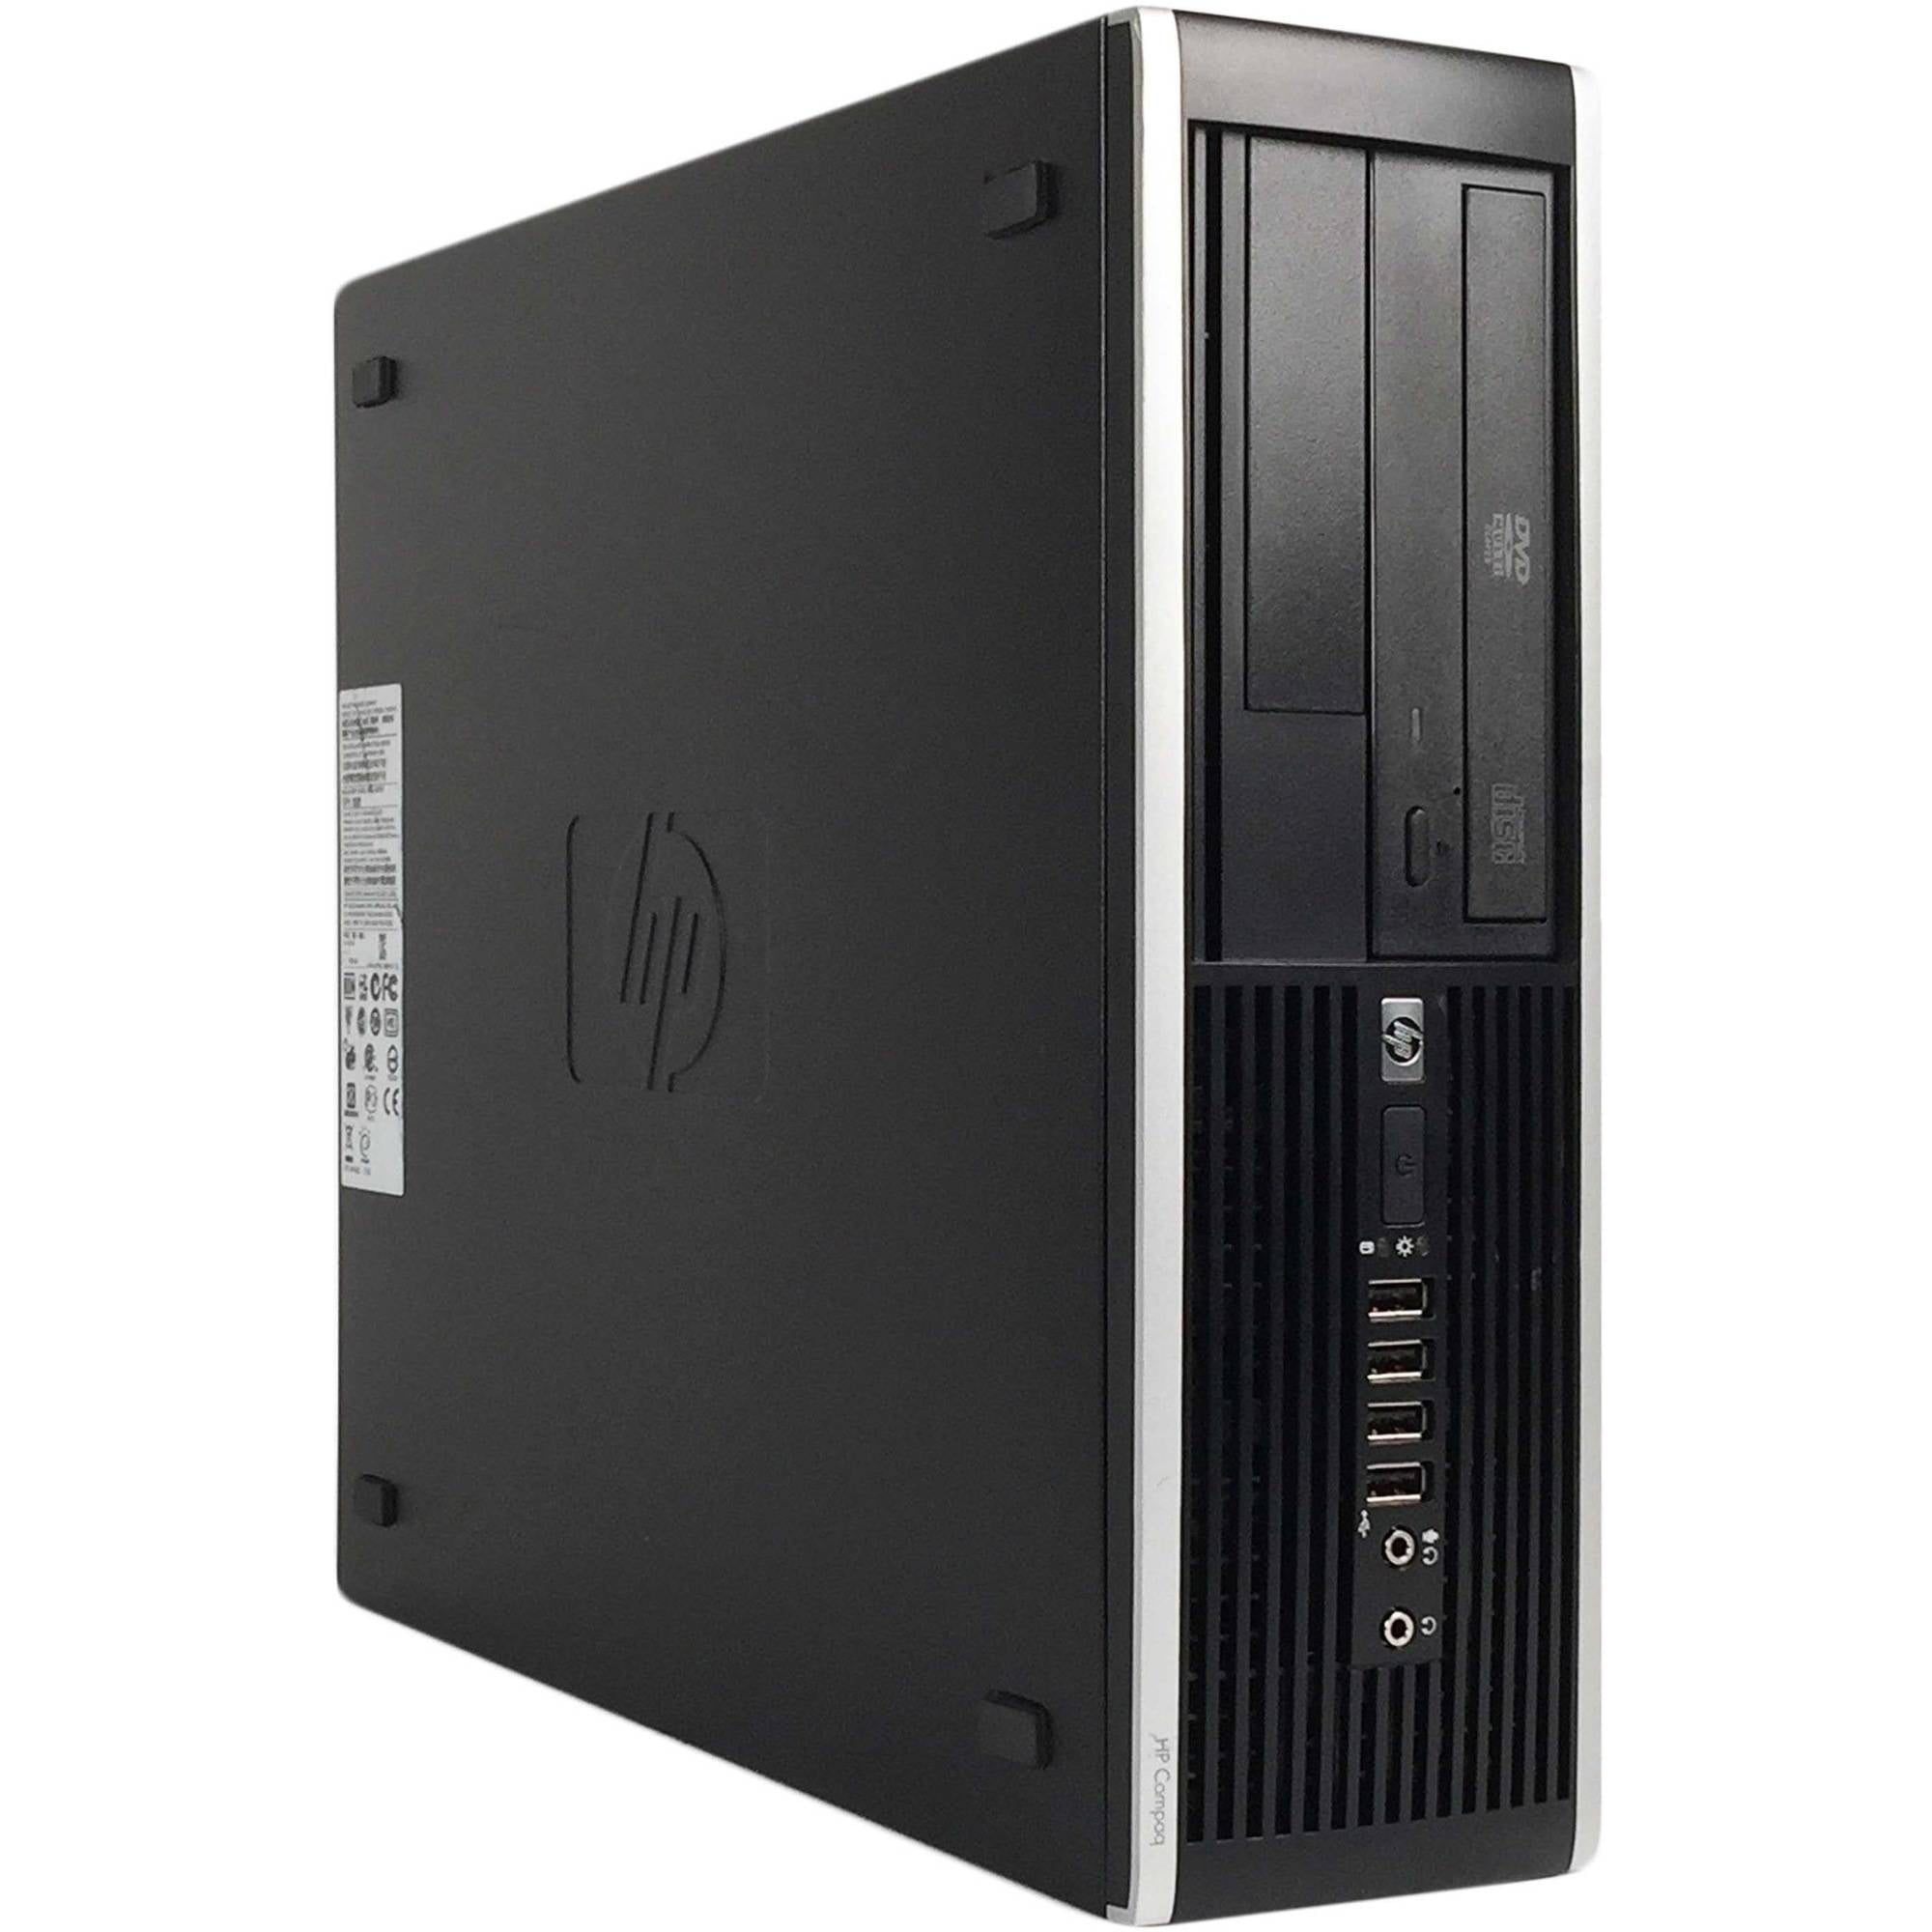 Restored HP 6200 Pro Small Form Factor Desktop PC with Intel Core